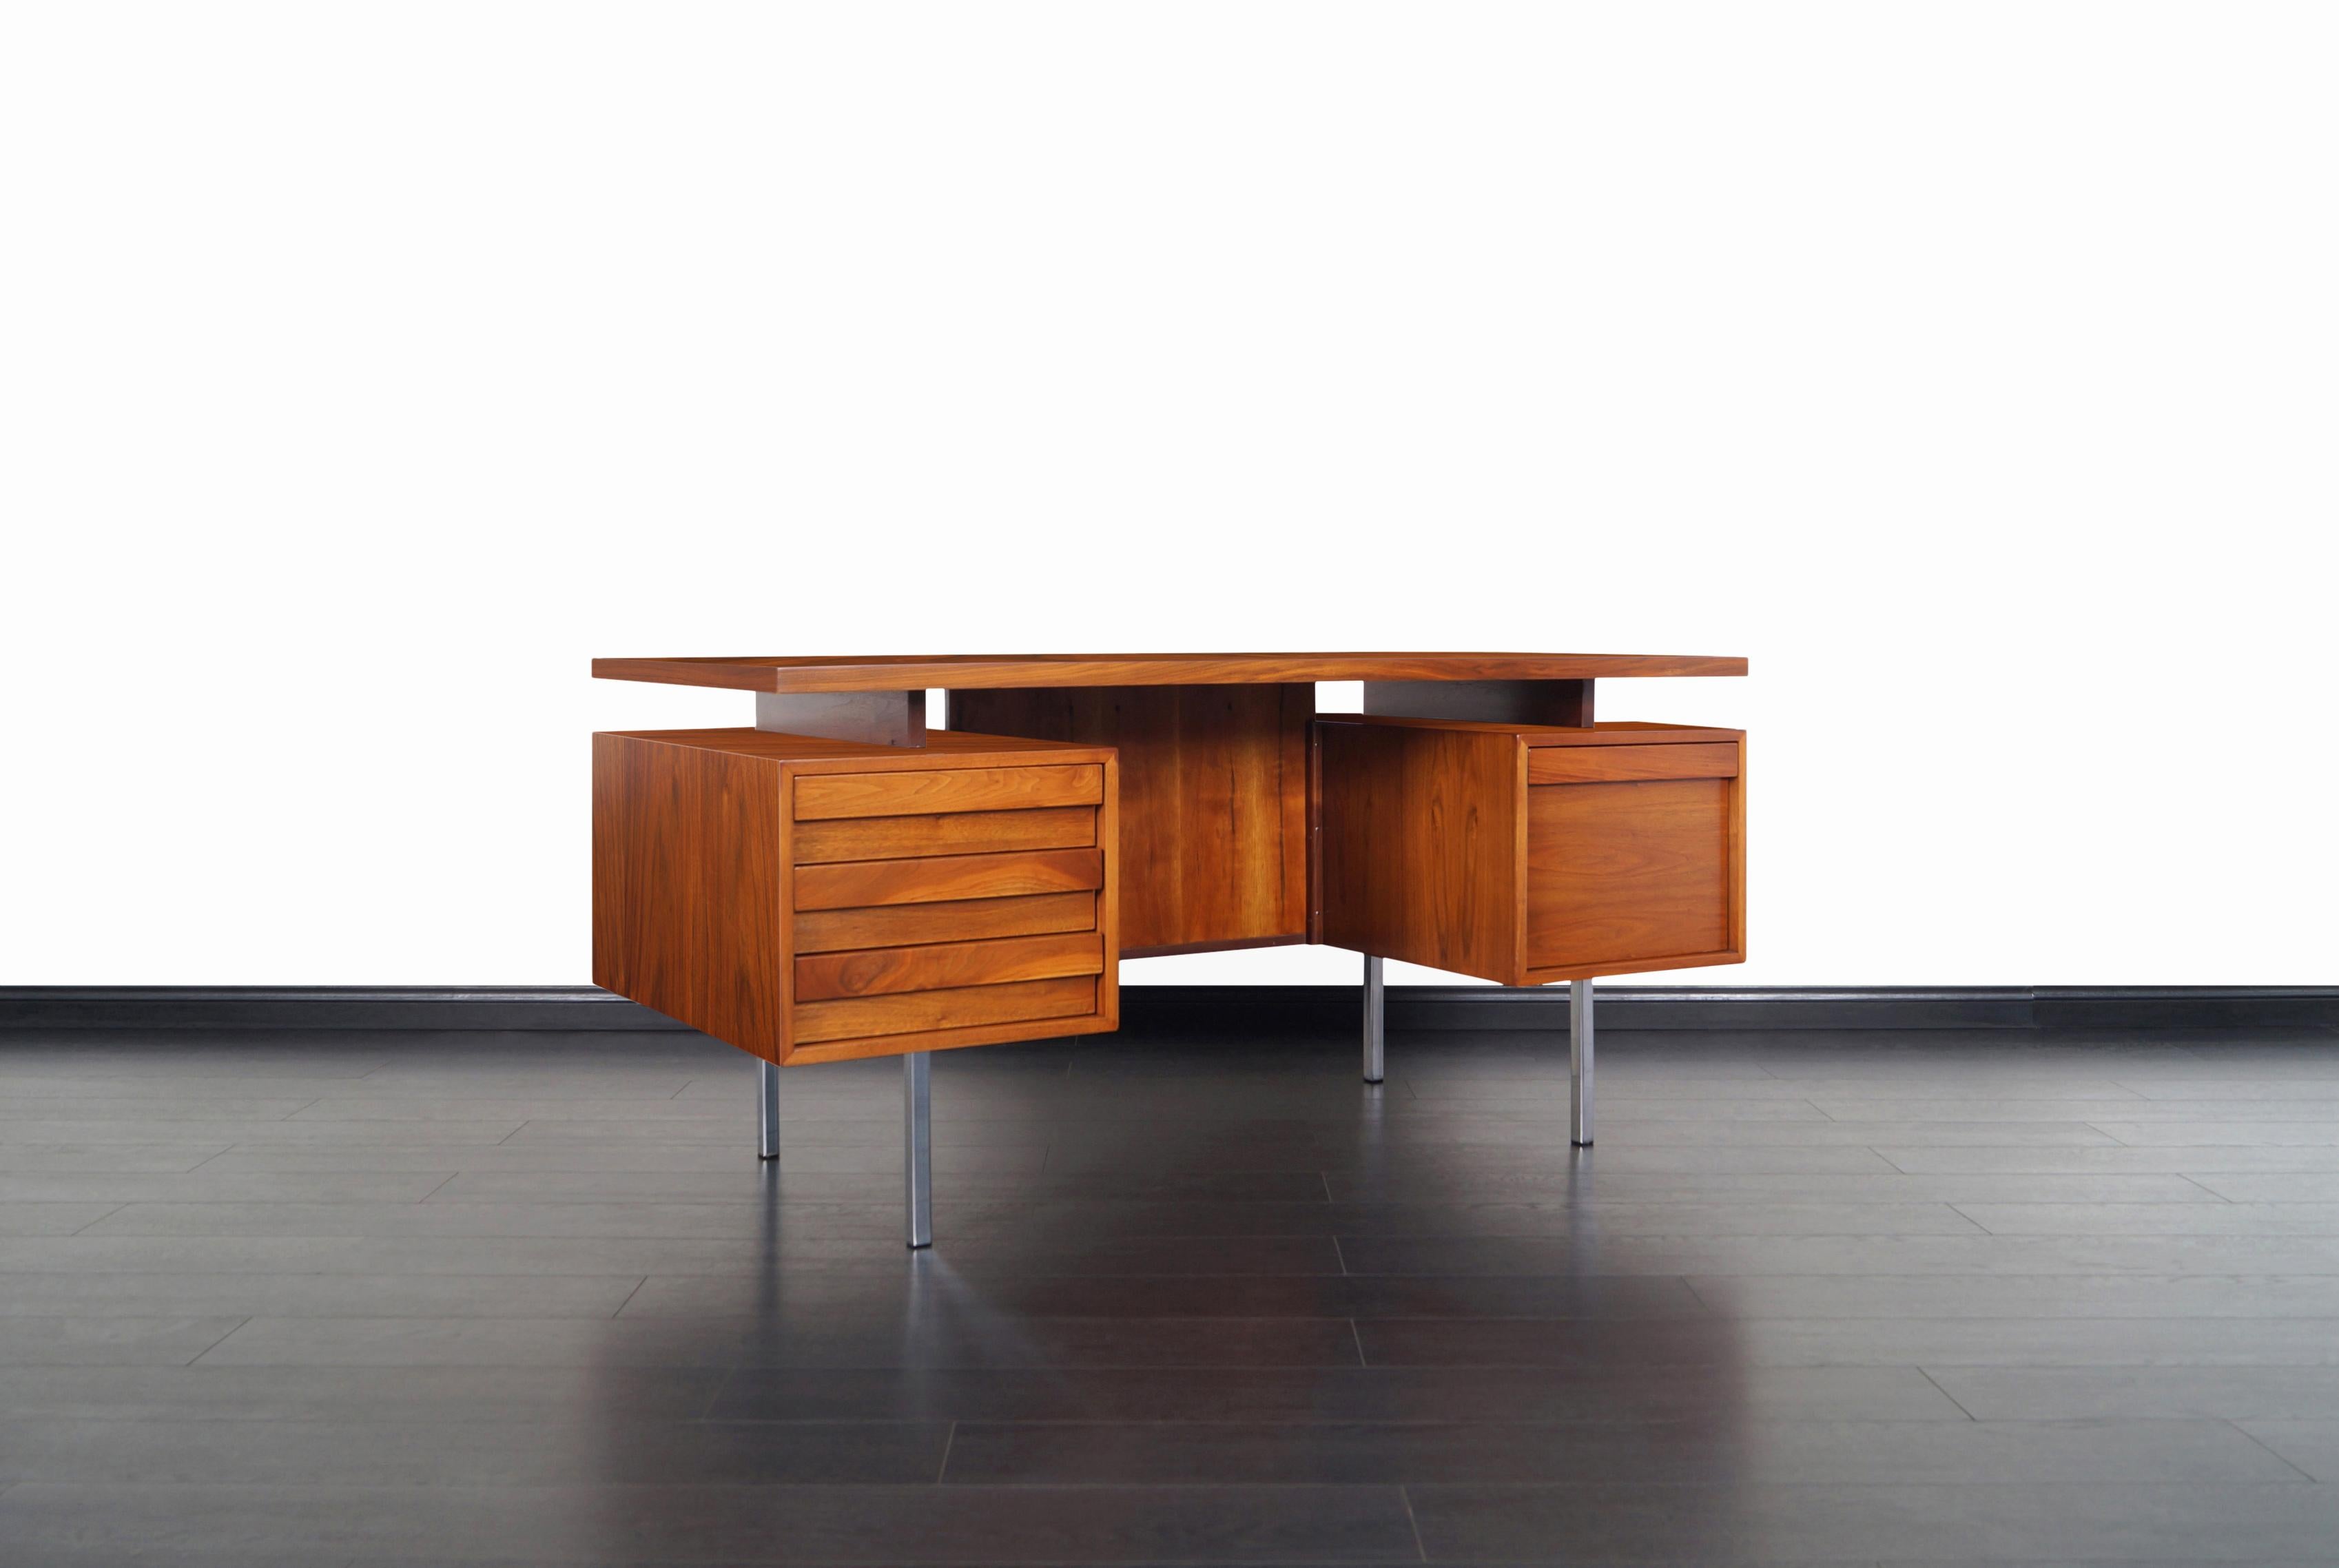 Vintage executive desk designed by John Keal for Brown Saltman in the United States. This exceptional crafted desk features three pull-out drawers and a file drawer all with sculpted pulls. On the opposite side of the desk there's an open space for